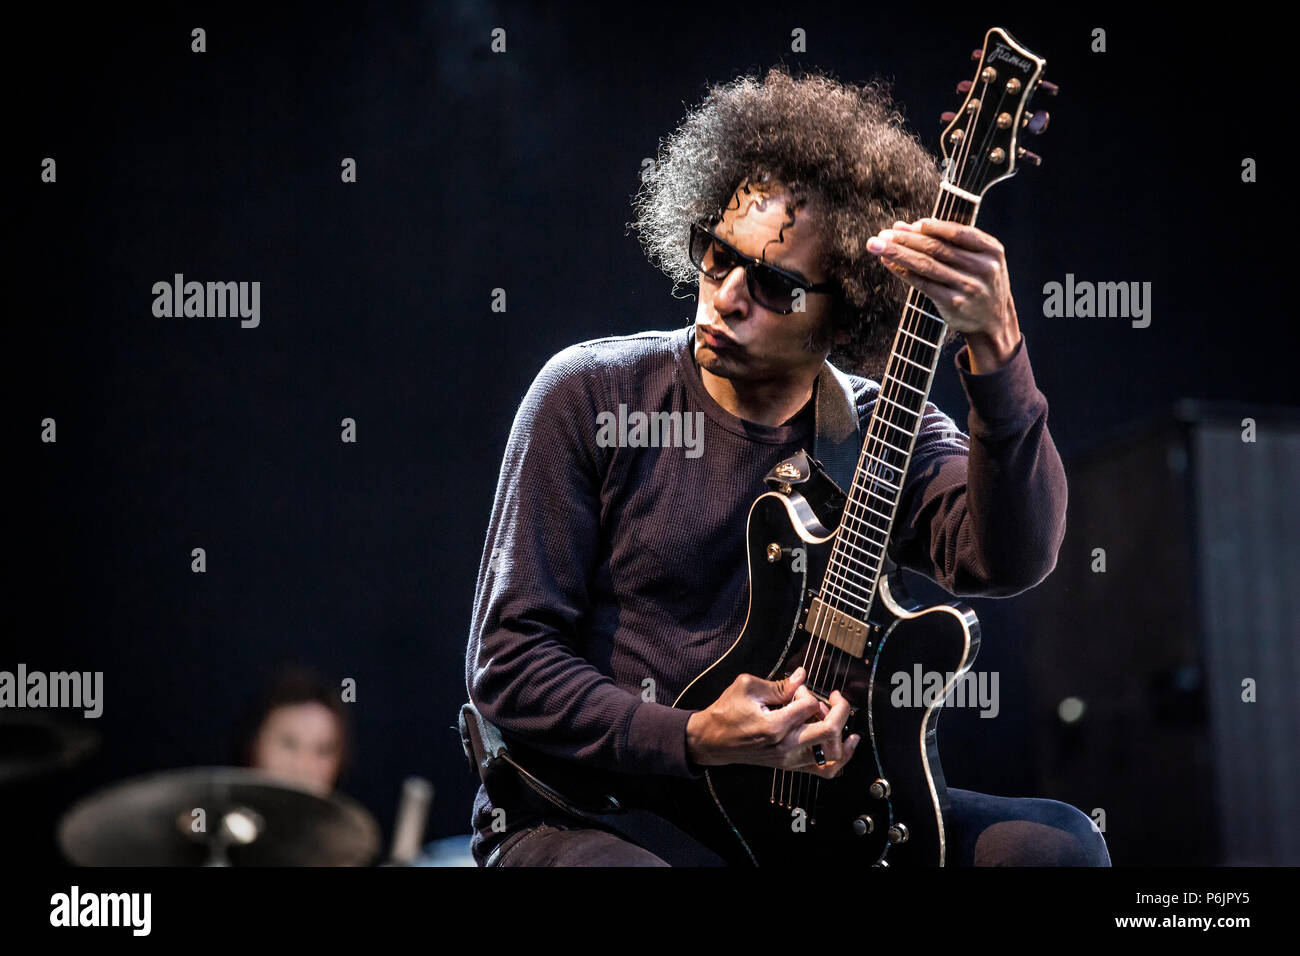 Norway, Halden - June 21, 2018. The American rock band Alice in Chains performs a live concert during the Norwegian music metal festival Tons of Rock 2018 in Halden. Here singer and guitarist William DuVall is seen live on stage. (Photo credit: Gonzales Photo - Terje Dokken). Stock Photo